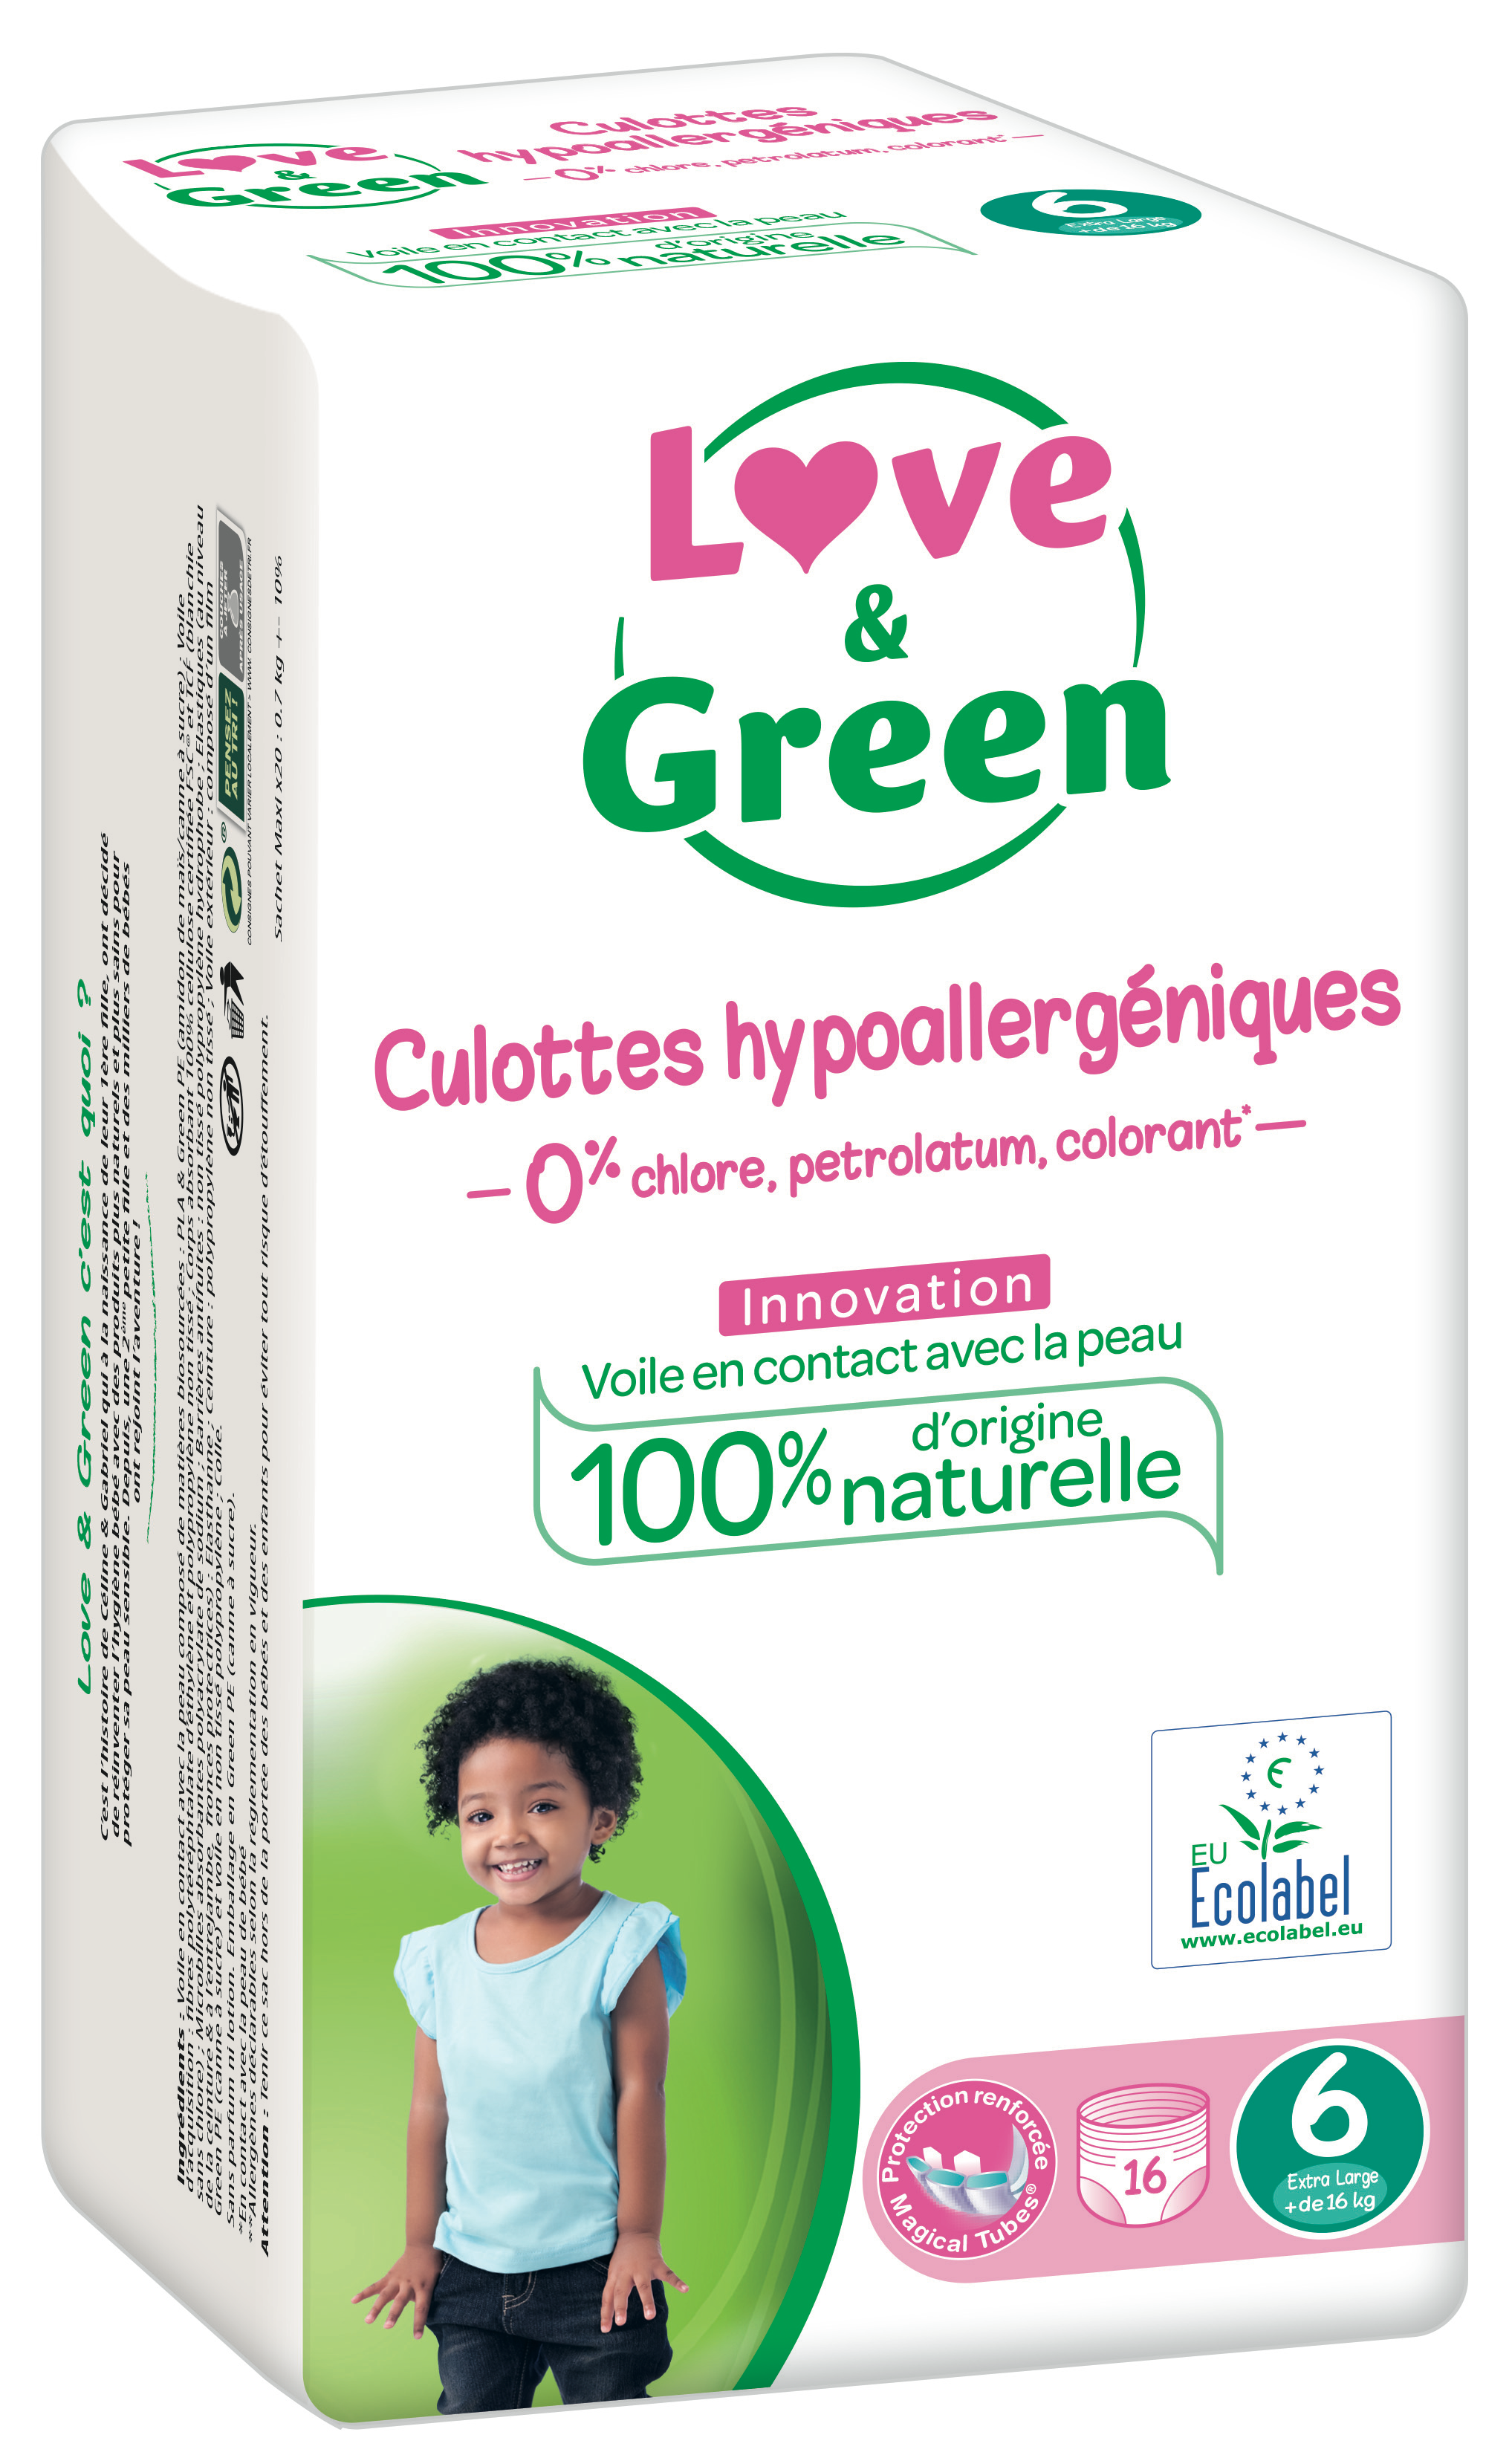 LOVE & GREEN Culottes hypoallergeniques taille 6 16 culottes pas cher 